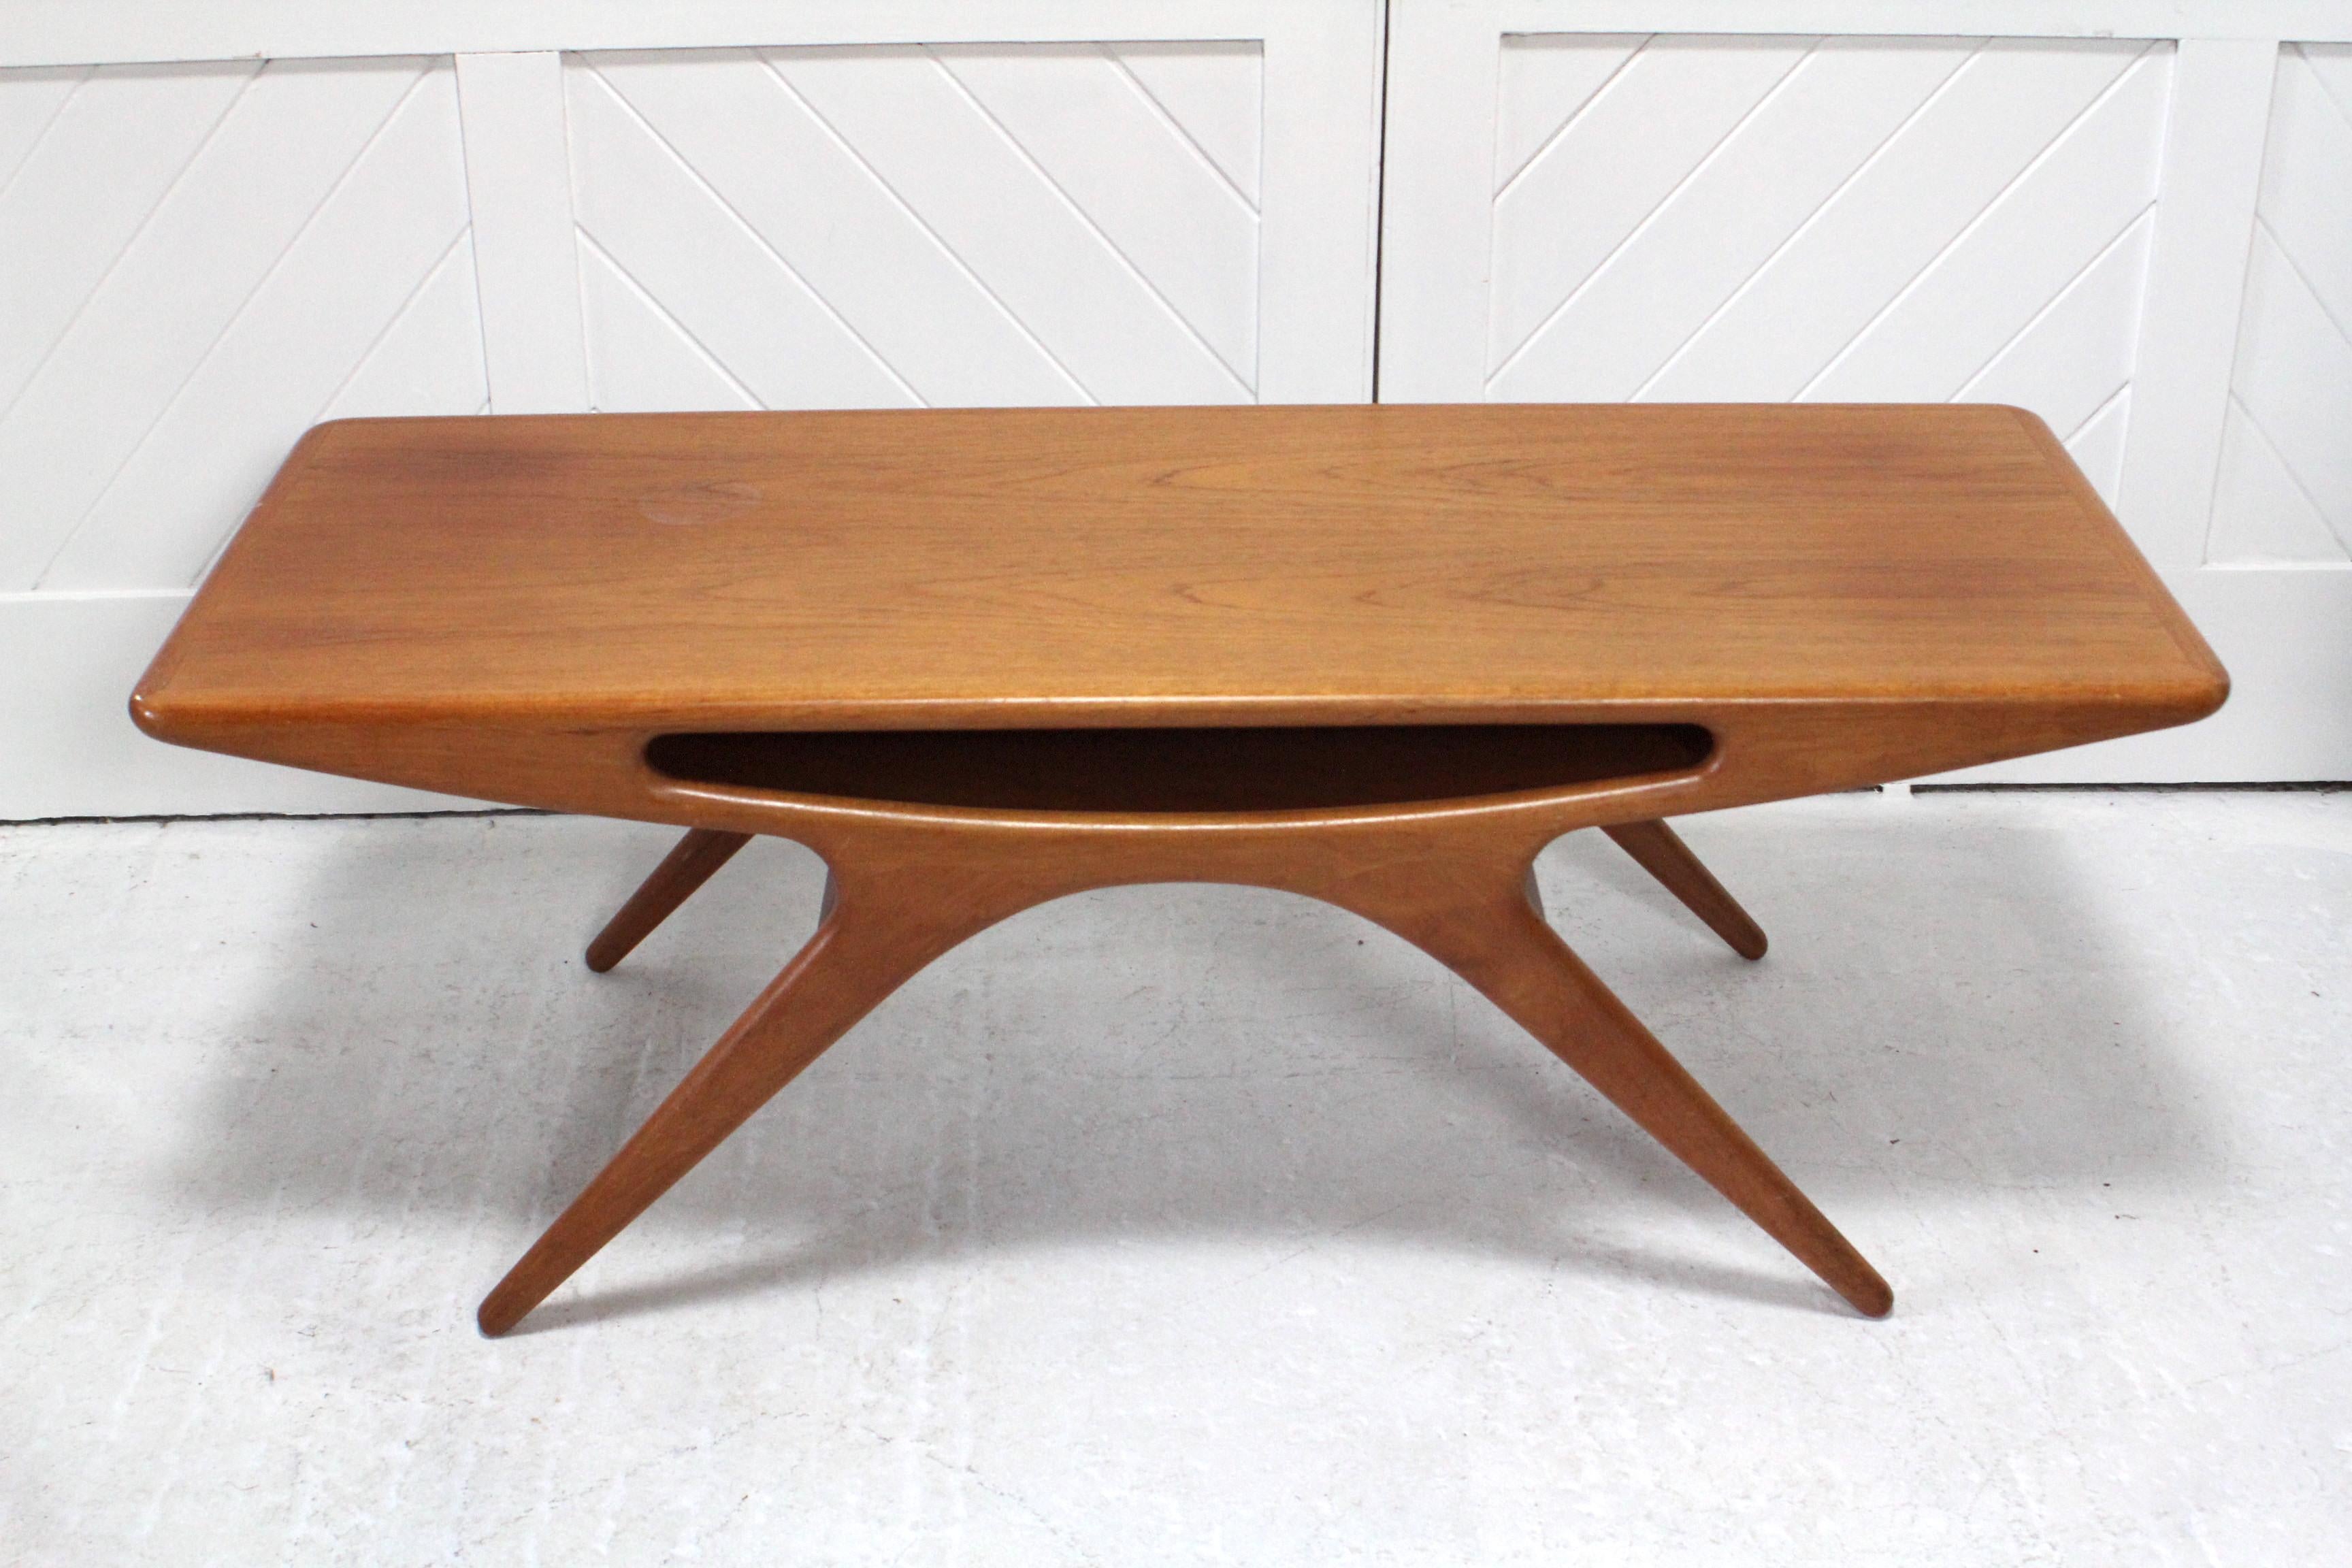 Fifties teak ‘smile’ table with centre pocket shelf.
Johannes Andersen (1903-1991) 
For CFC Silkeborg
Denmark

Johannes Andersen trained as a cabinet maker and opened his own architectural and furniture workshops in the 1930s. The iconic